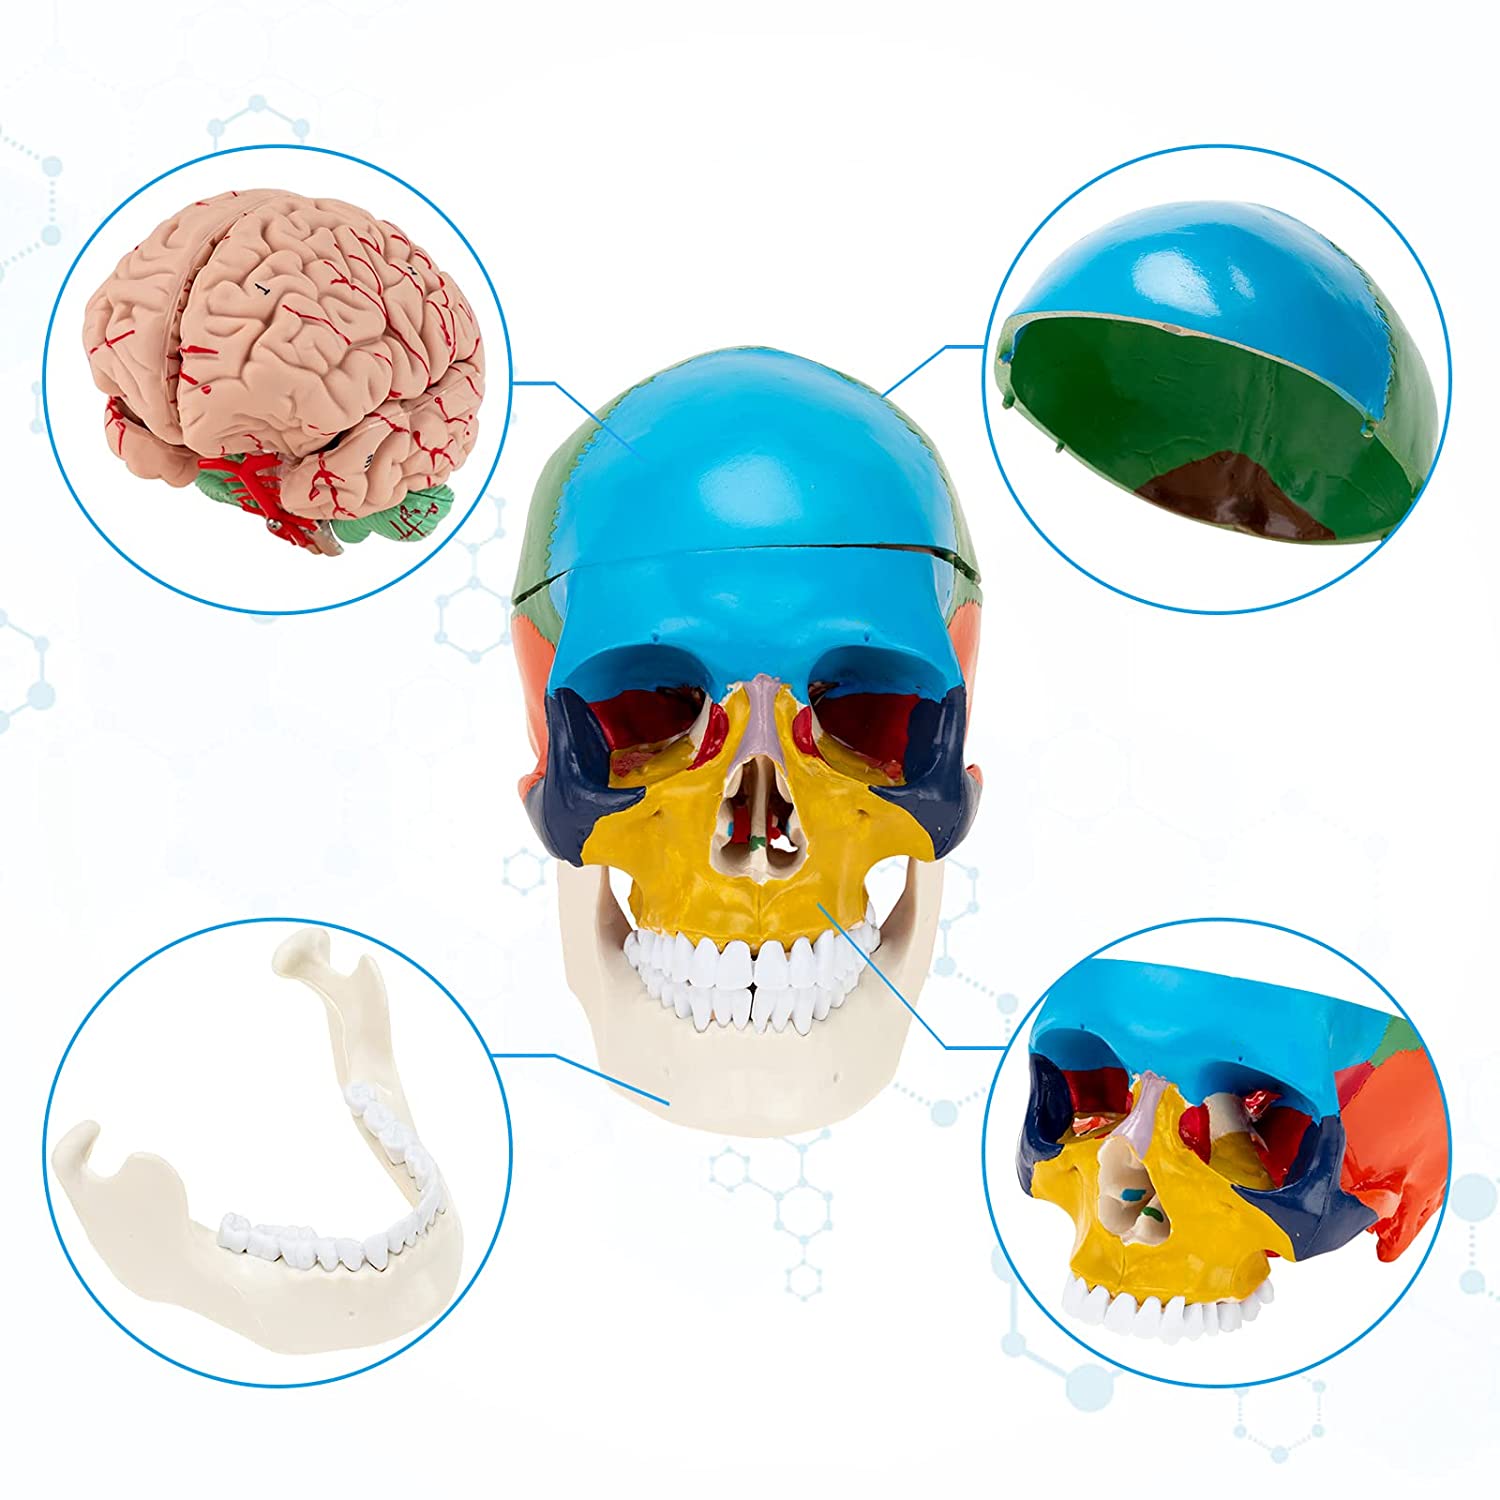  Life Size Human Colored Skull Model with Detachable Brain 